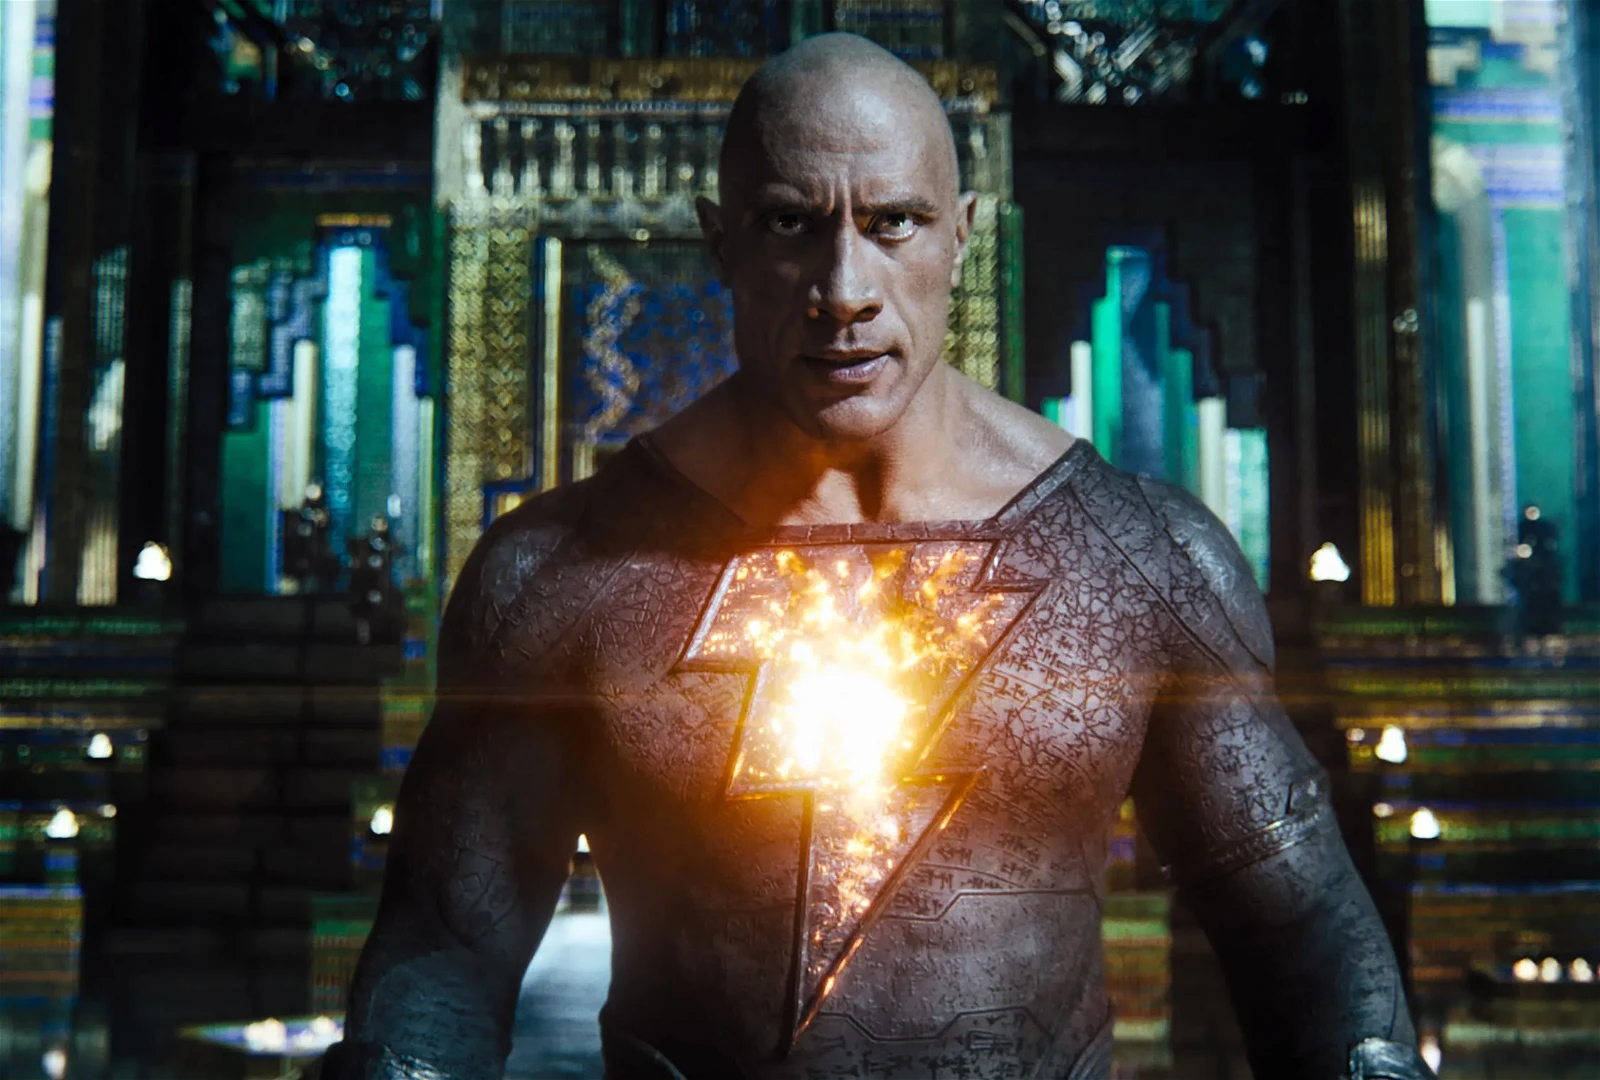 Dwayne Johnson attempts to save his waning career after Black Adam flops